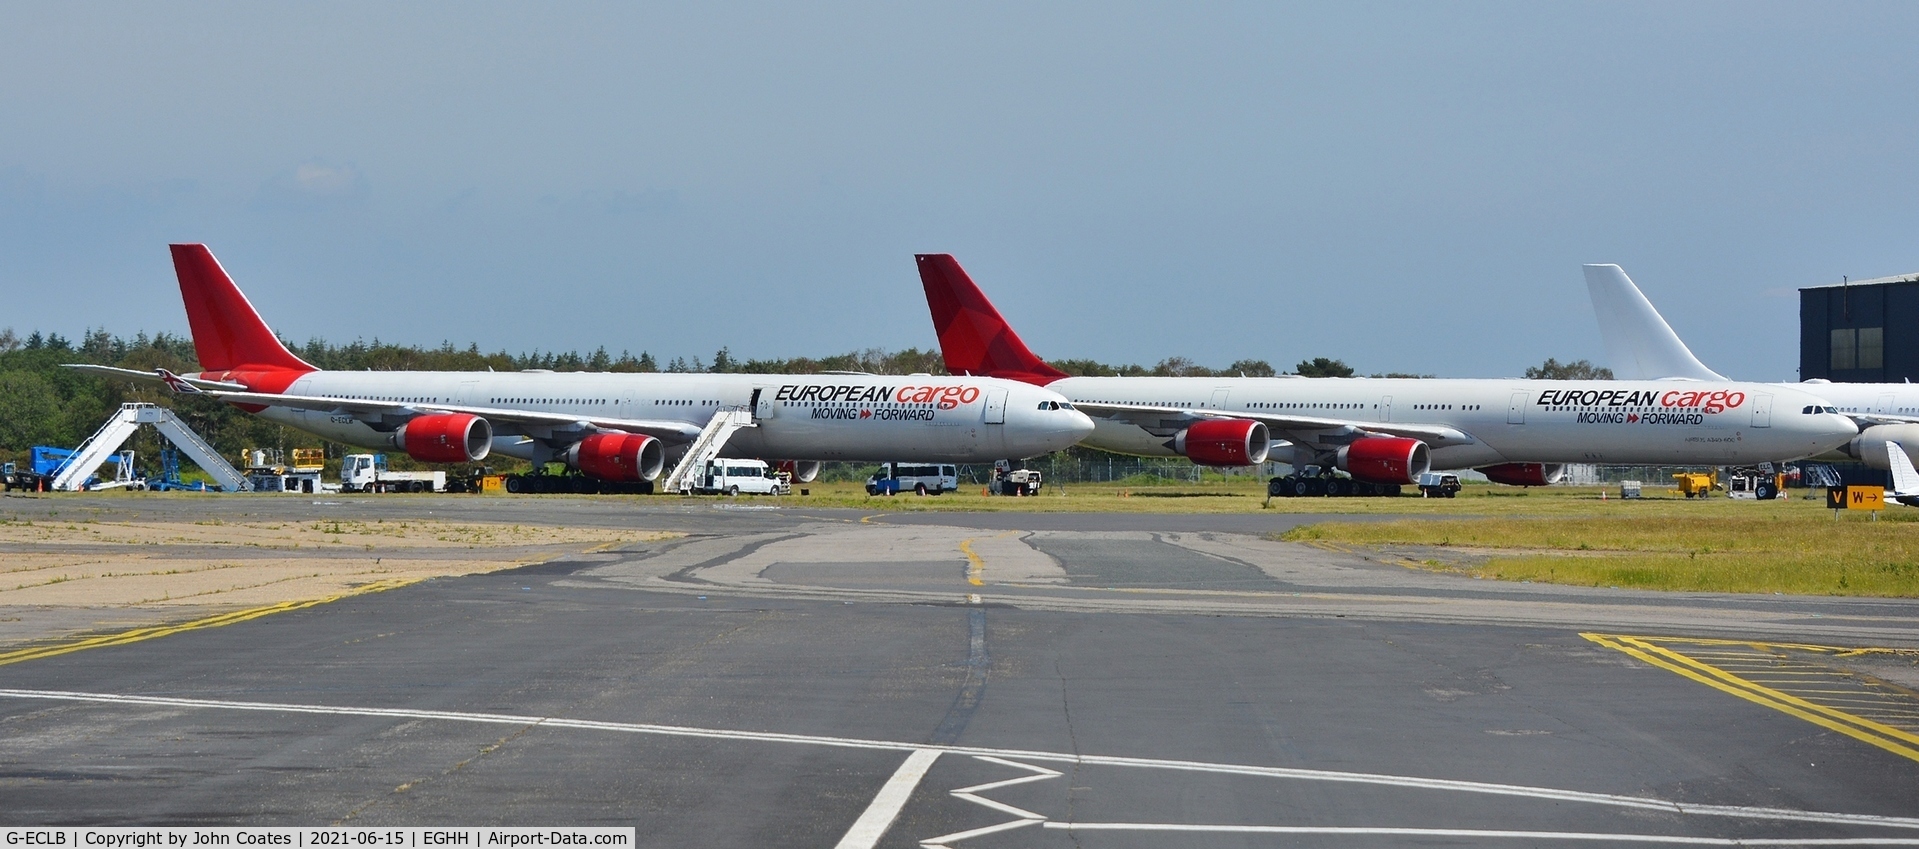 G-ECLB, 2006 Airbus A340-642 C/N 753, With G-ECLC